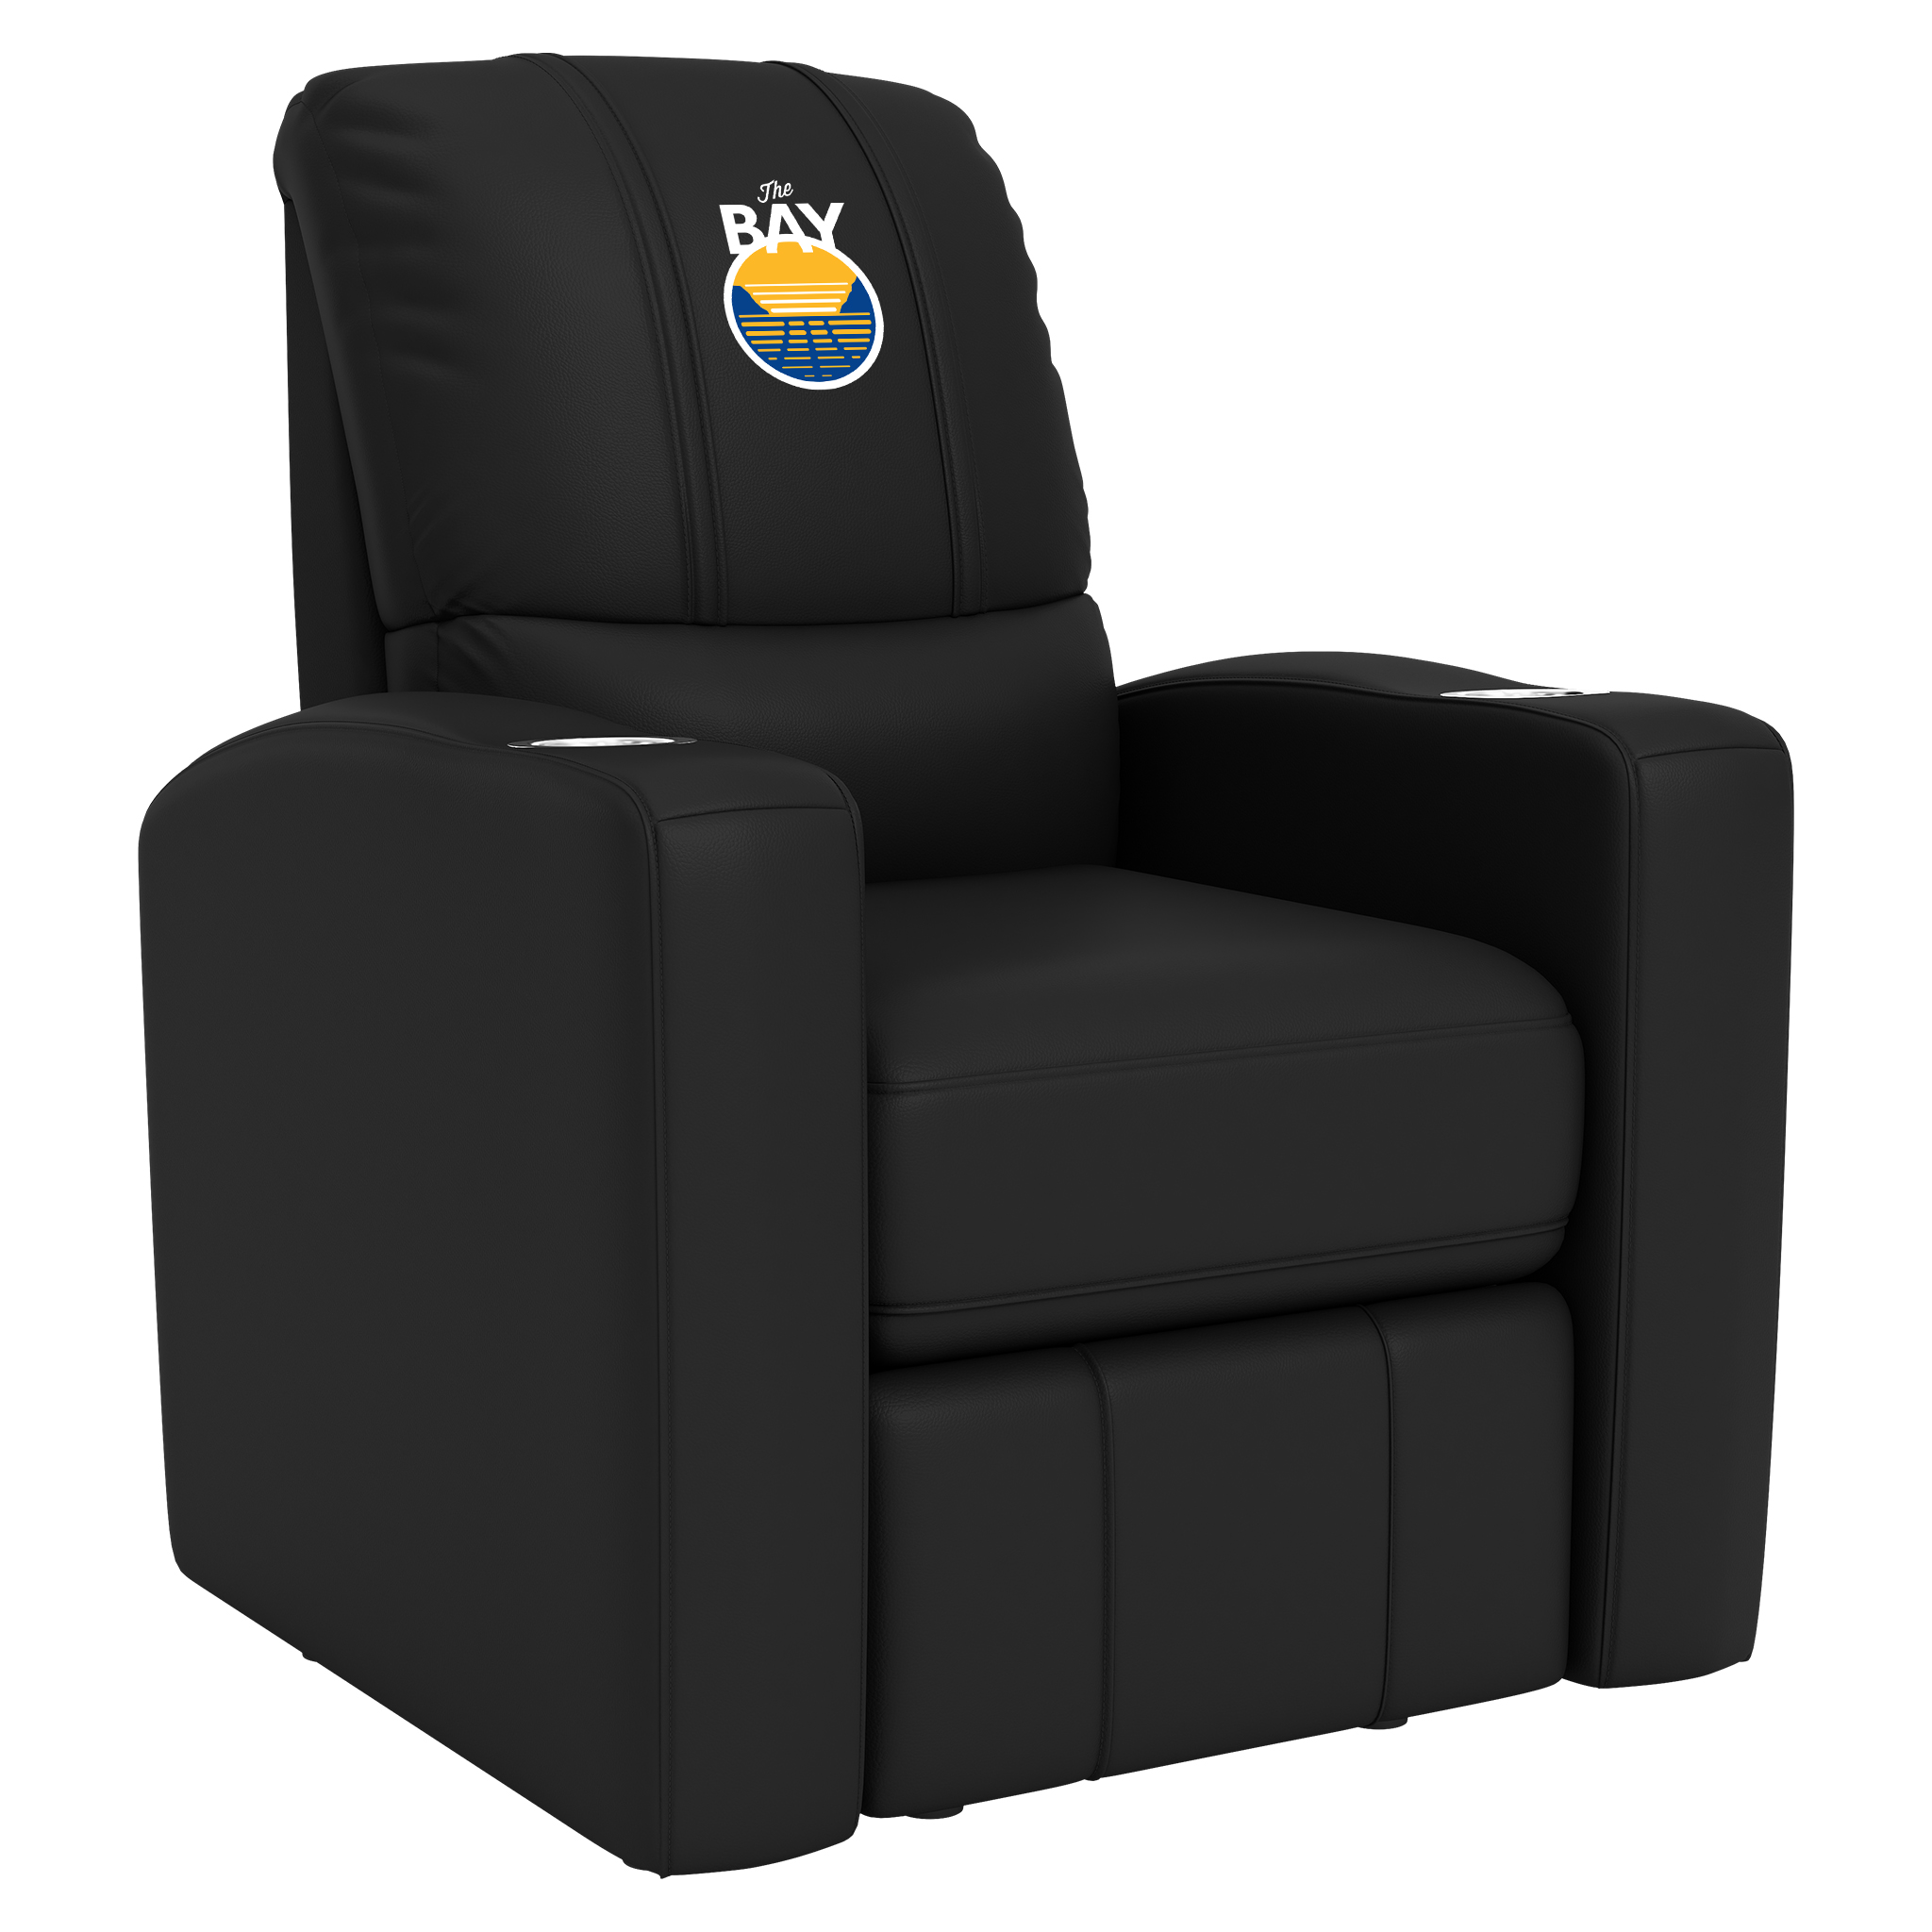 Golden State Warriors Stealth Recliner with Golden State Warriors Secondary Logo